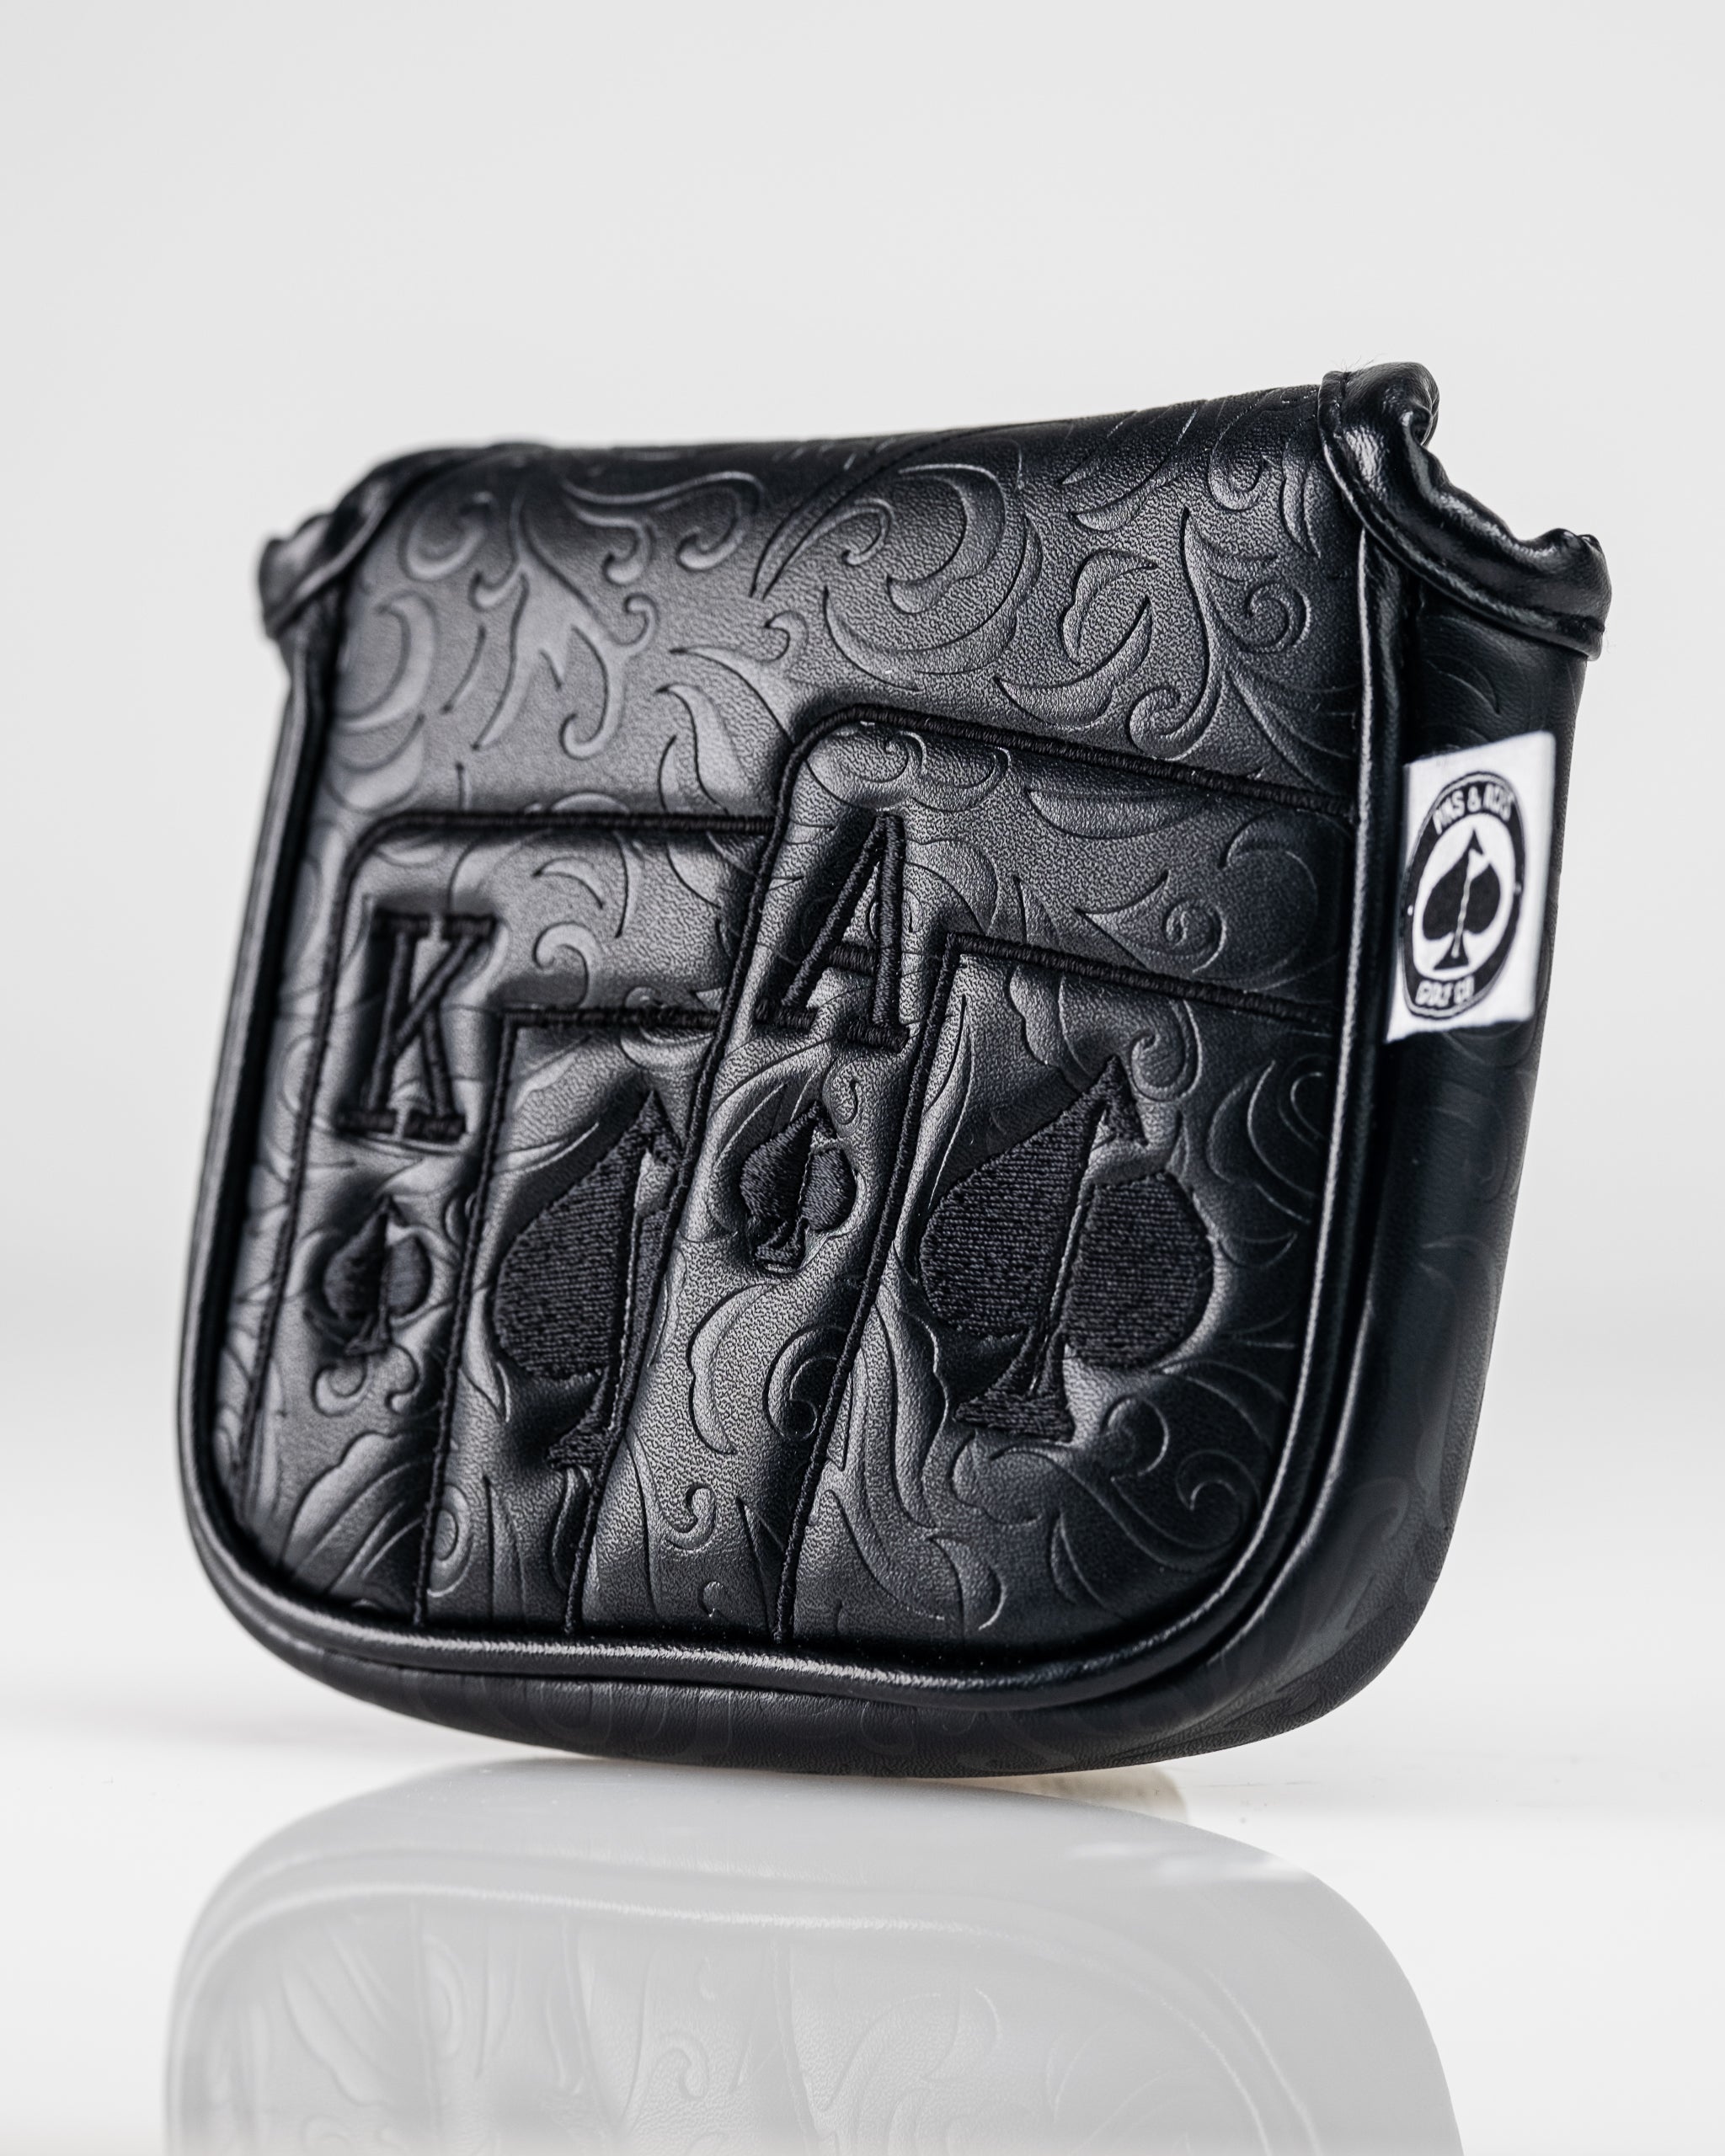 Blackout Ace of Spades - Mallet Putter Cover